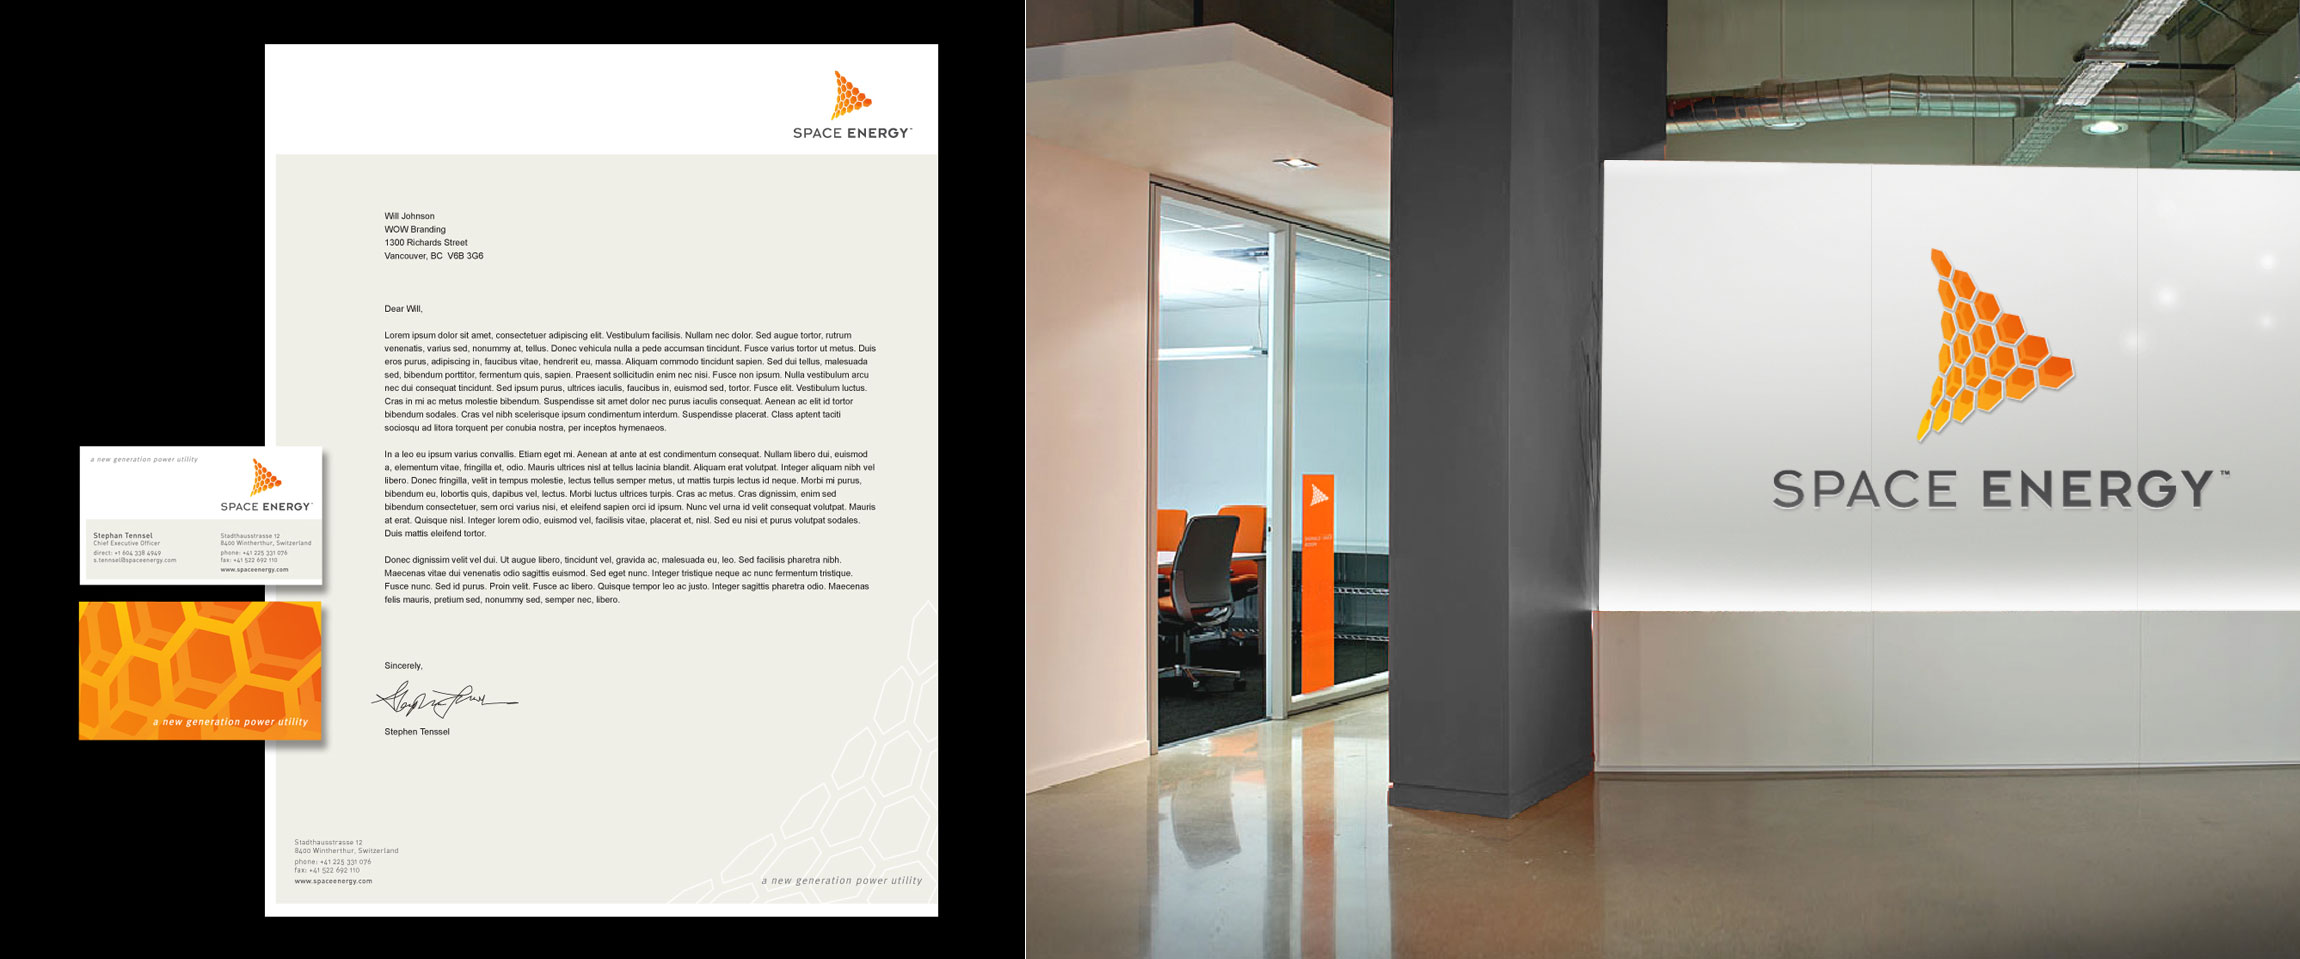 Space Energy letterhead and office space